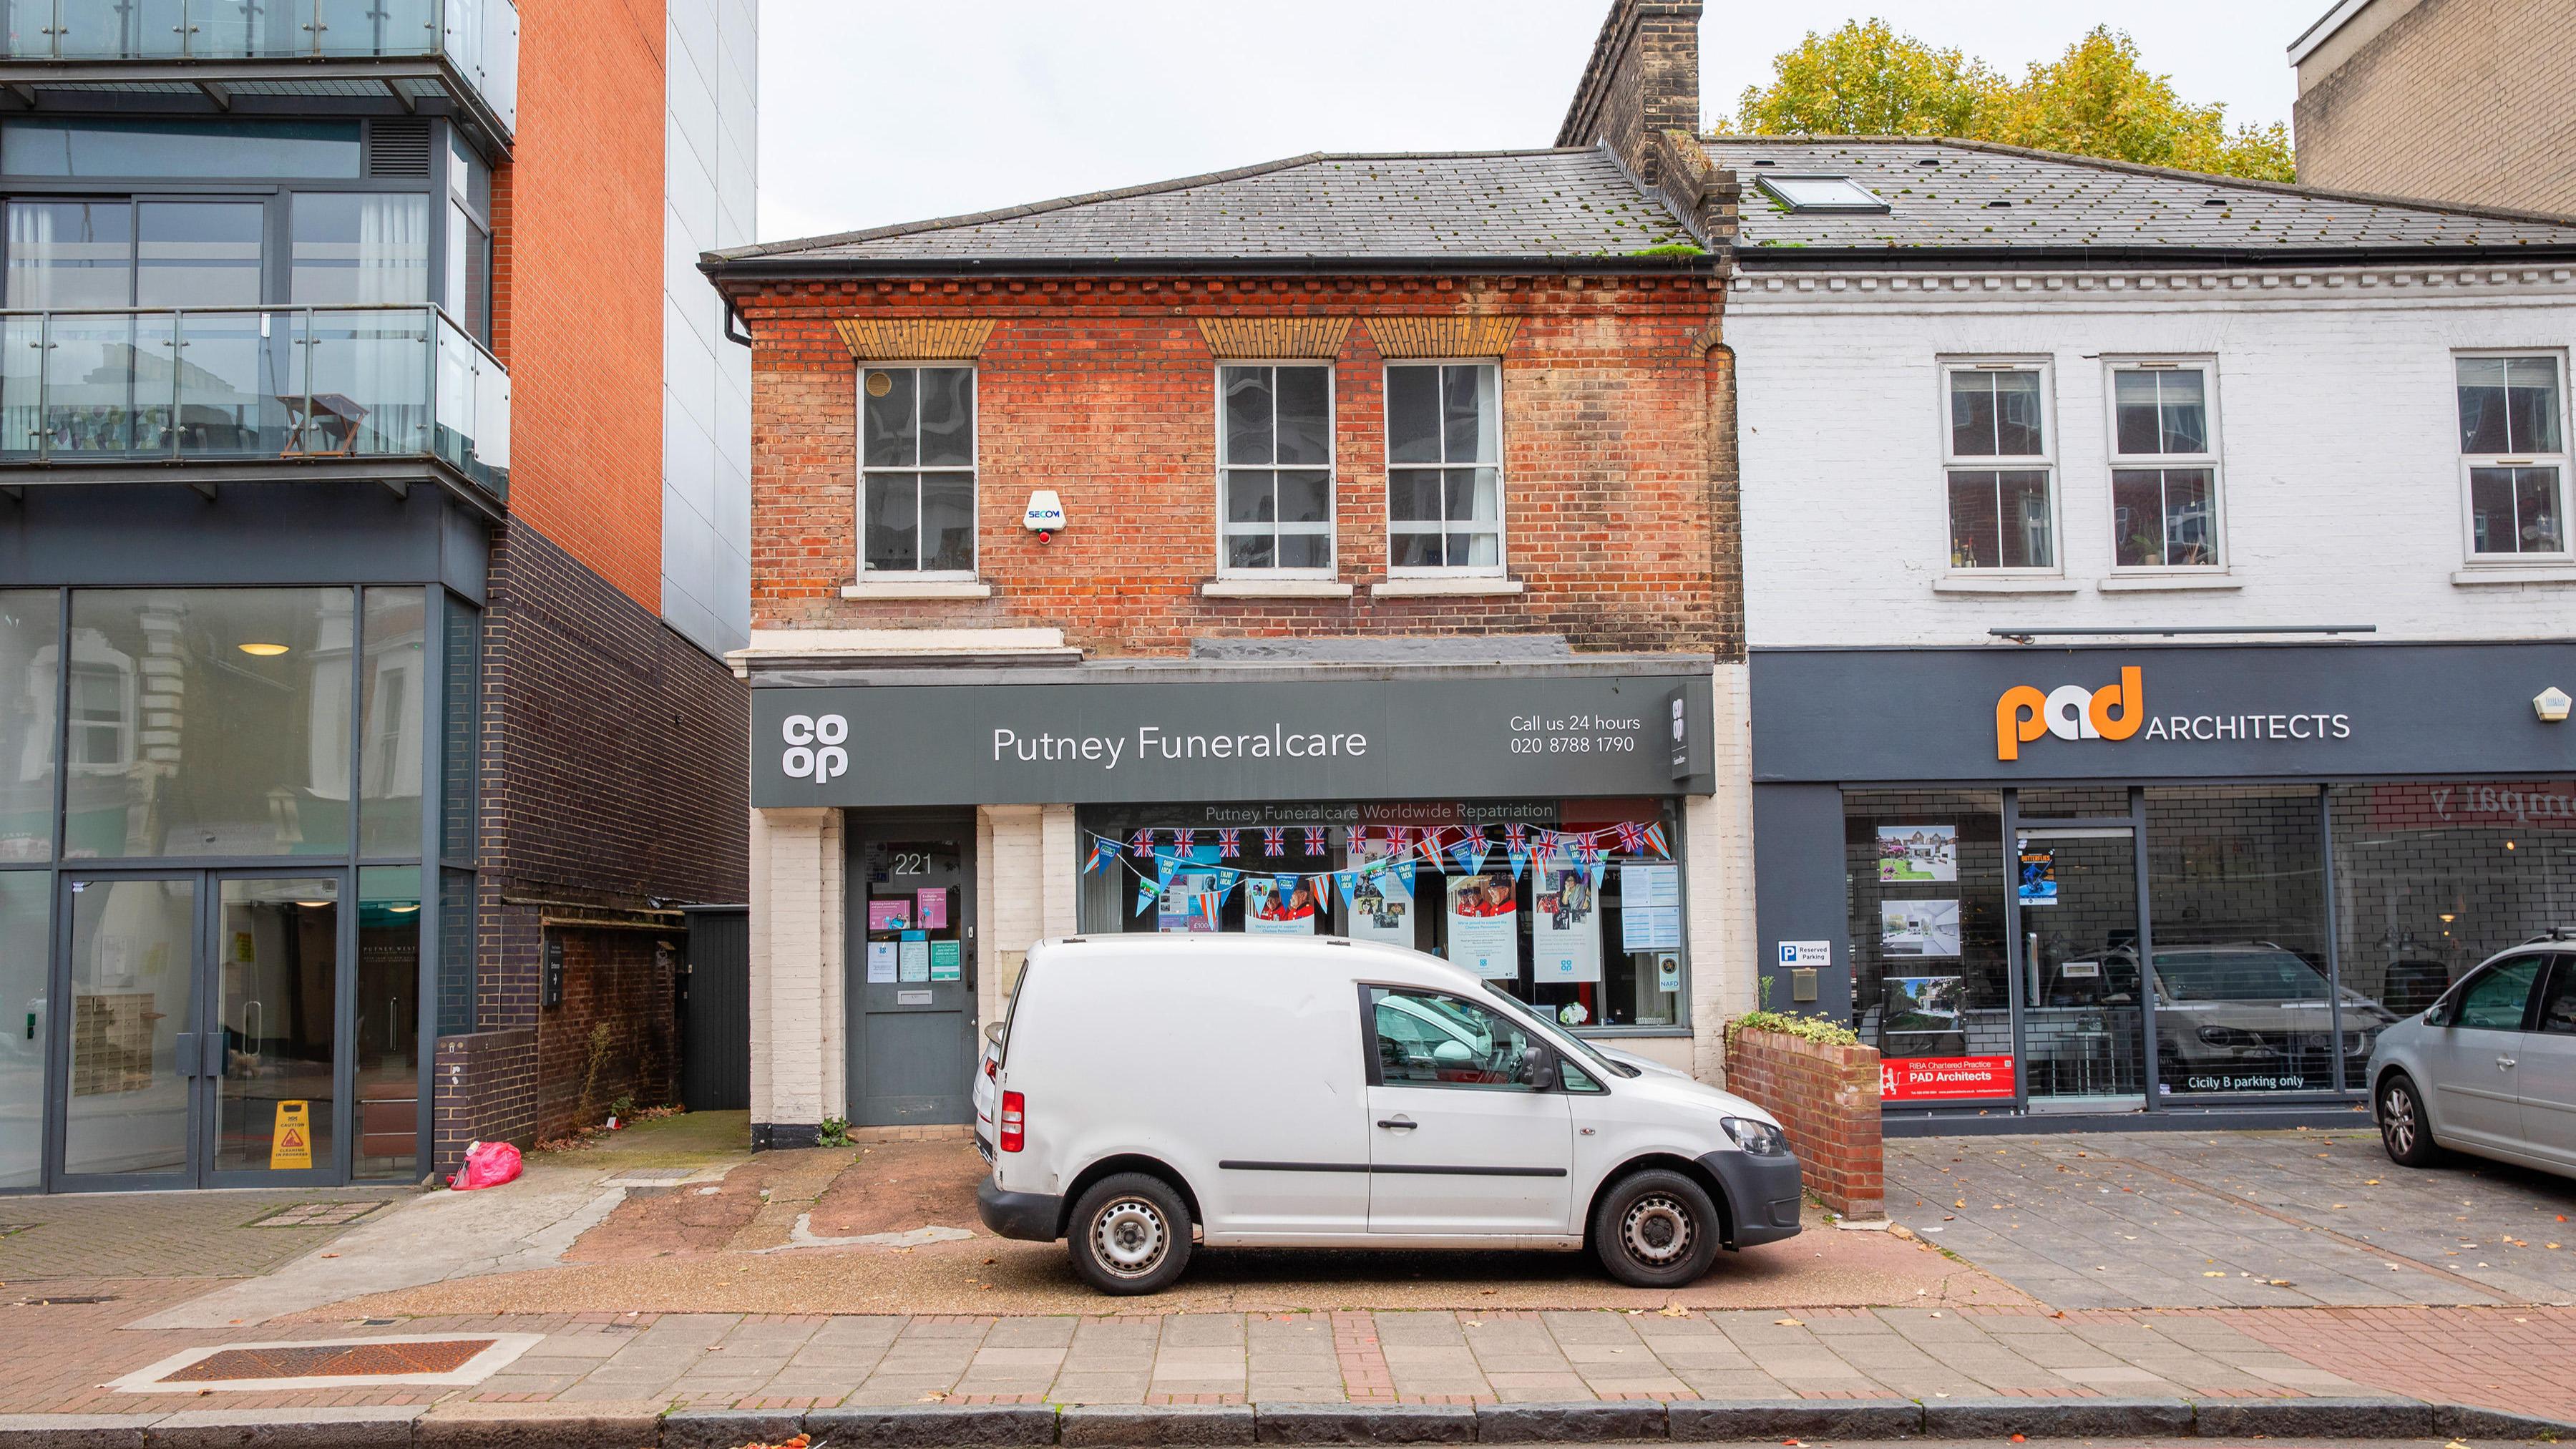 Images Putney Funeralcare